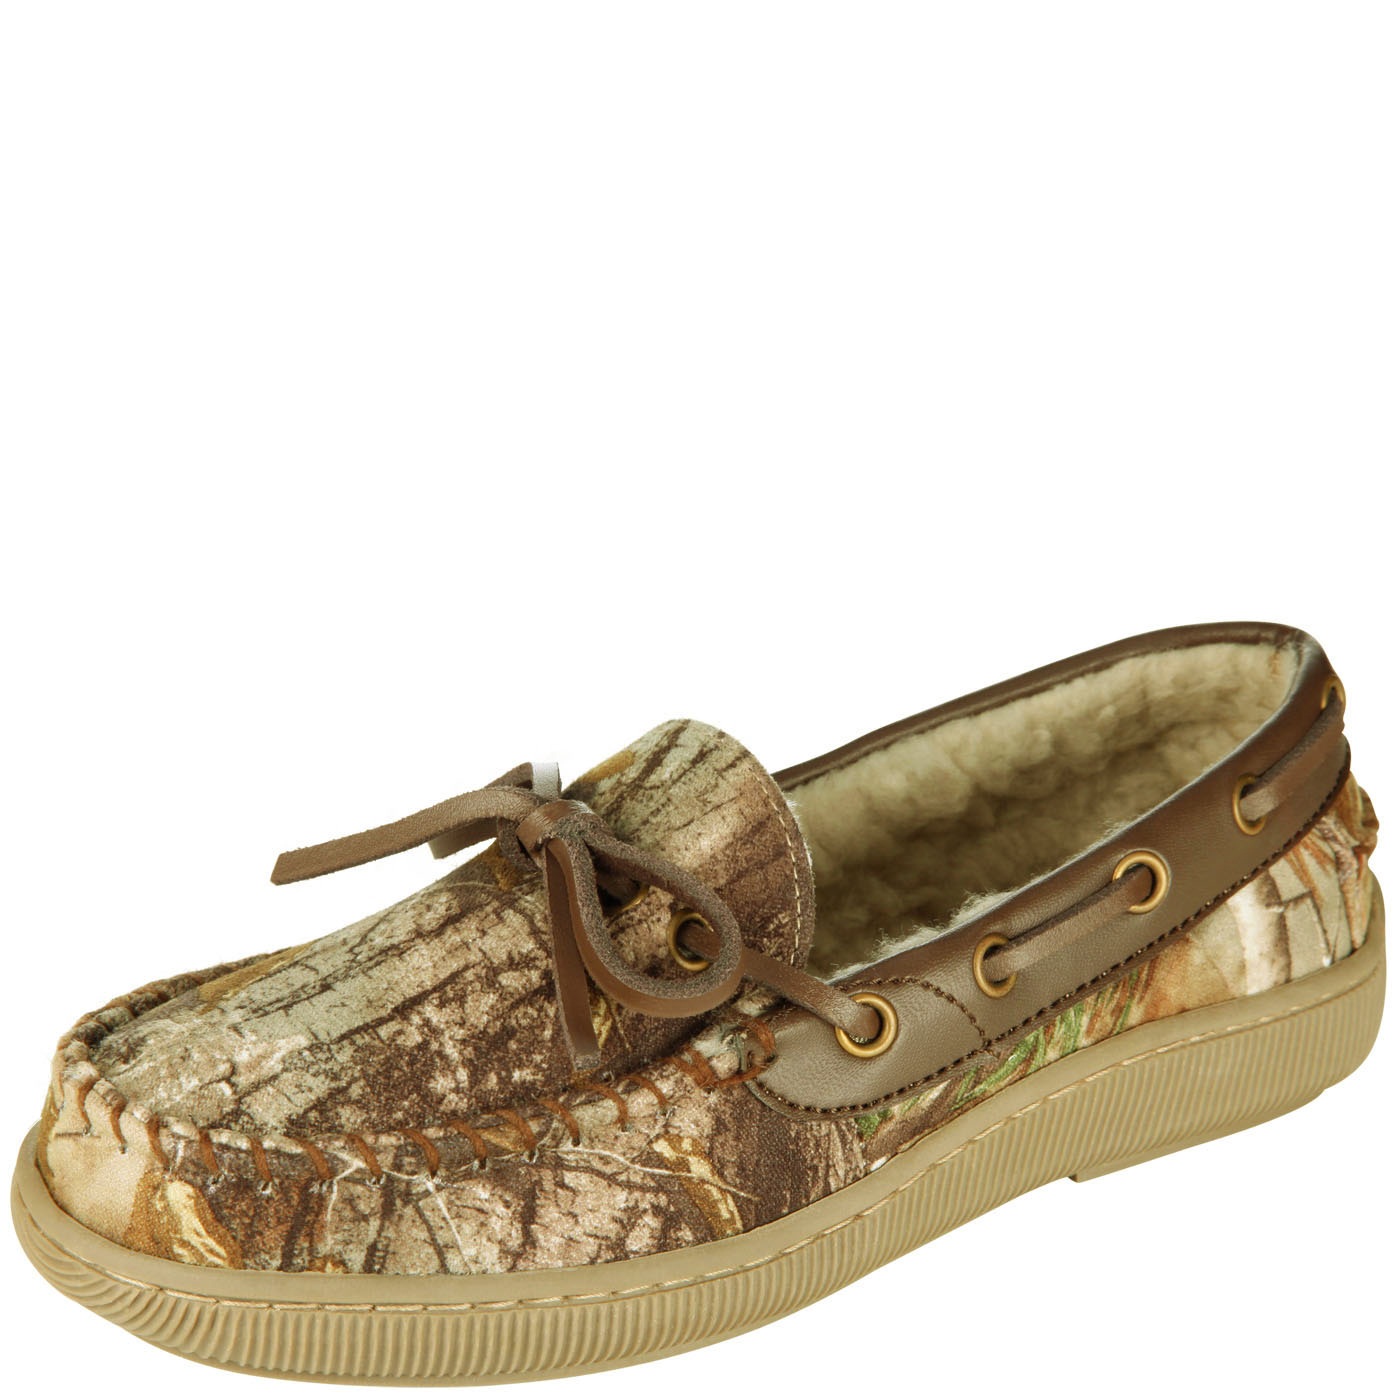 Realtree and Payless Release Camo Slippers | OutdoorHub